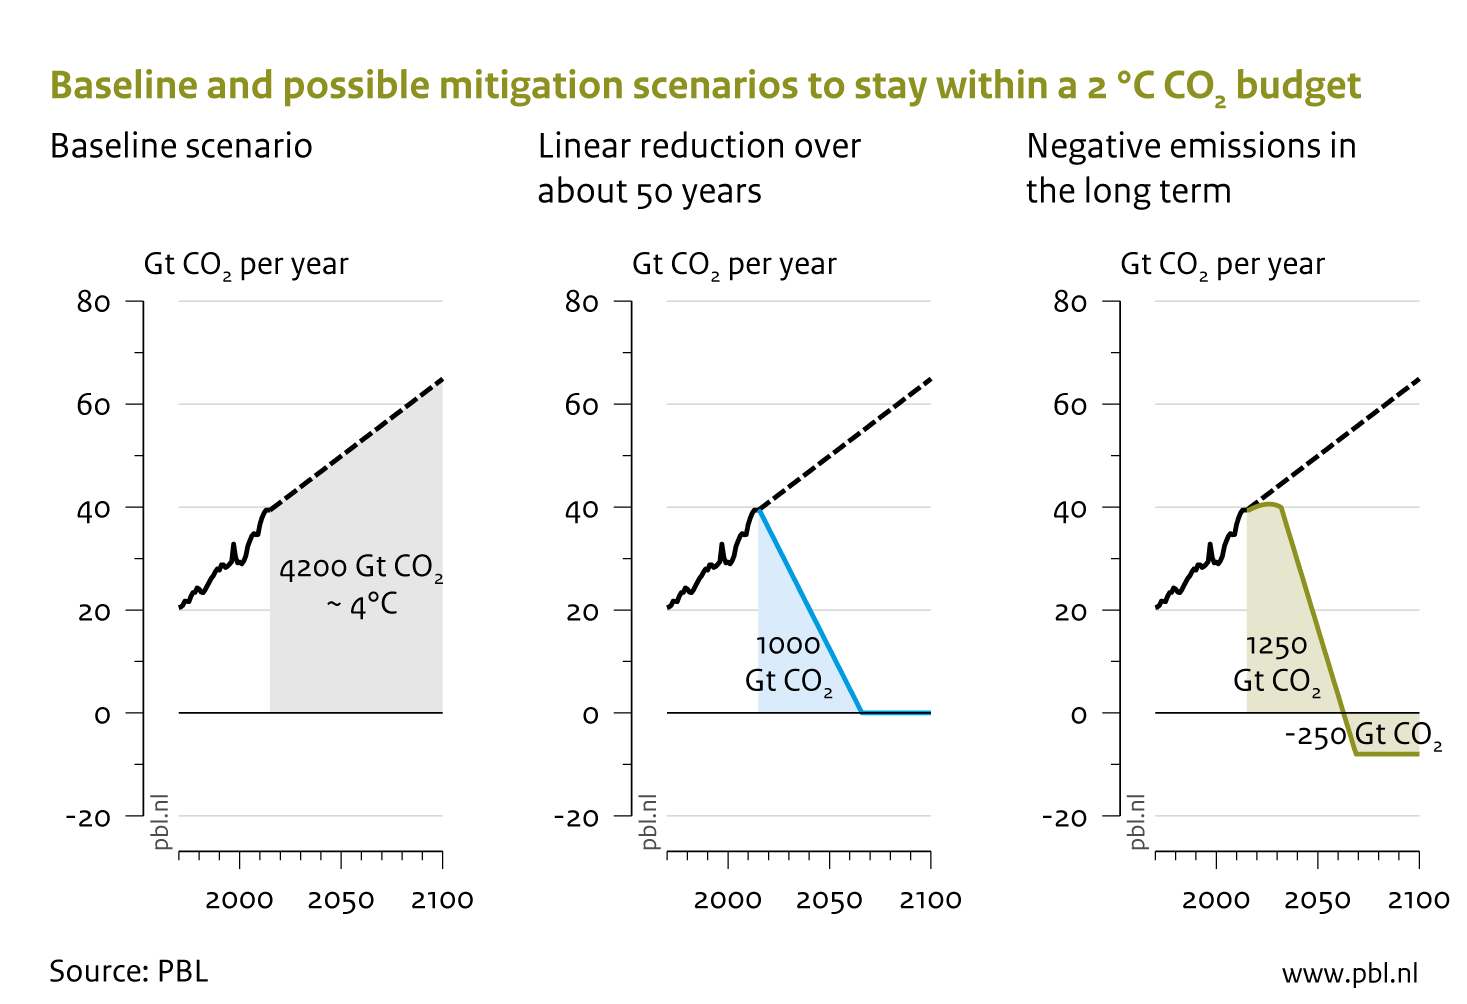 Simplified presentation of how the world can stay within the carbon budget of 1,000 billion tonnes of CO2, which makes it likely (66% chance) that warming will be limited to 2 °C.